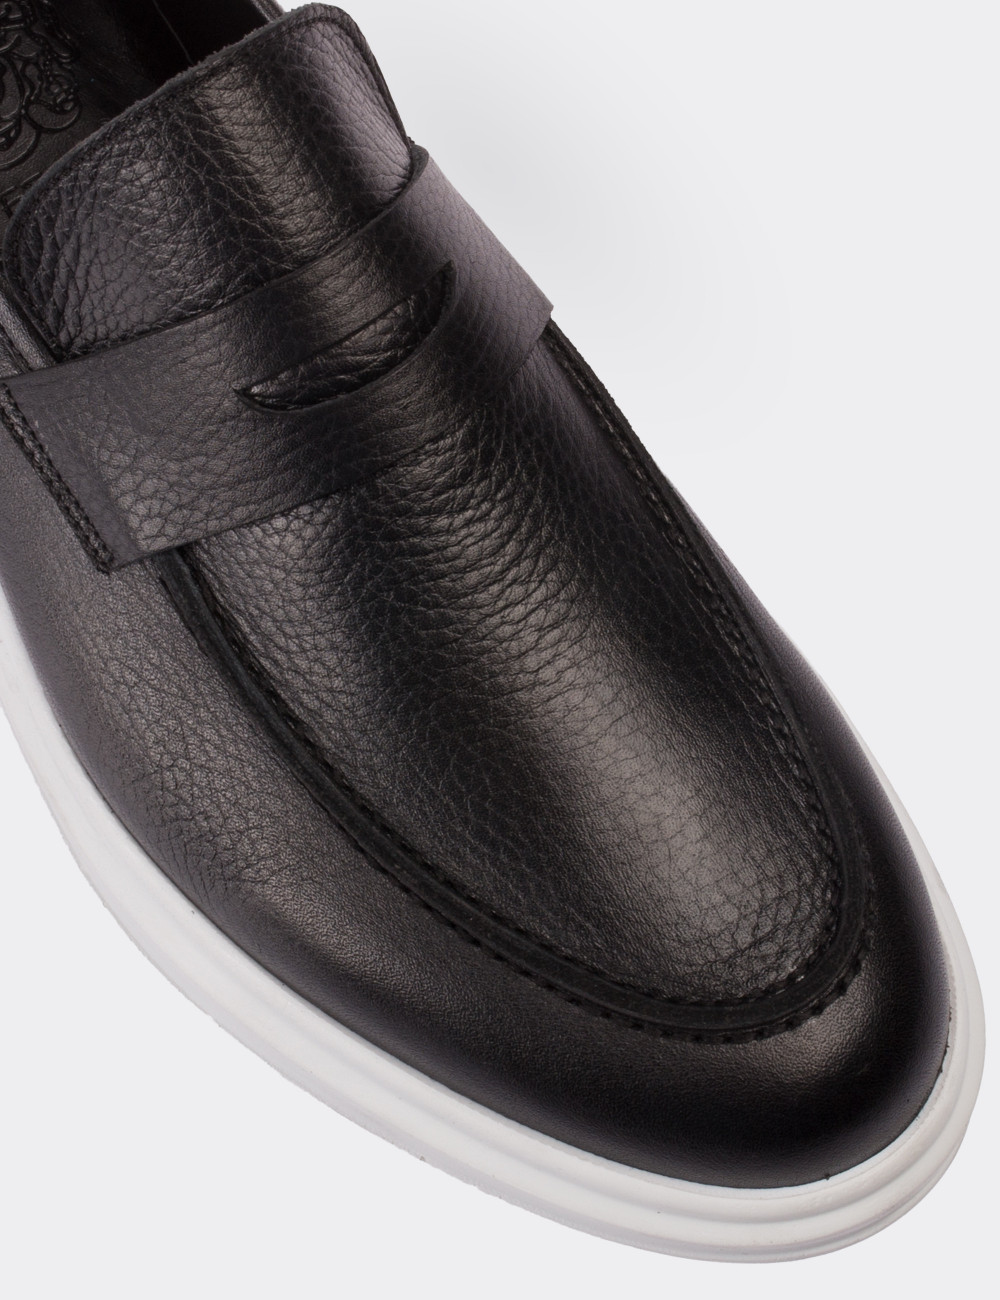 Black  Leather Loafers - 01564MSYHP03